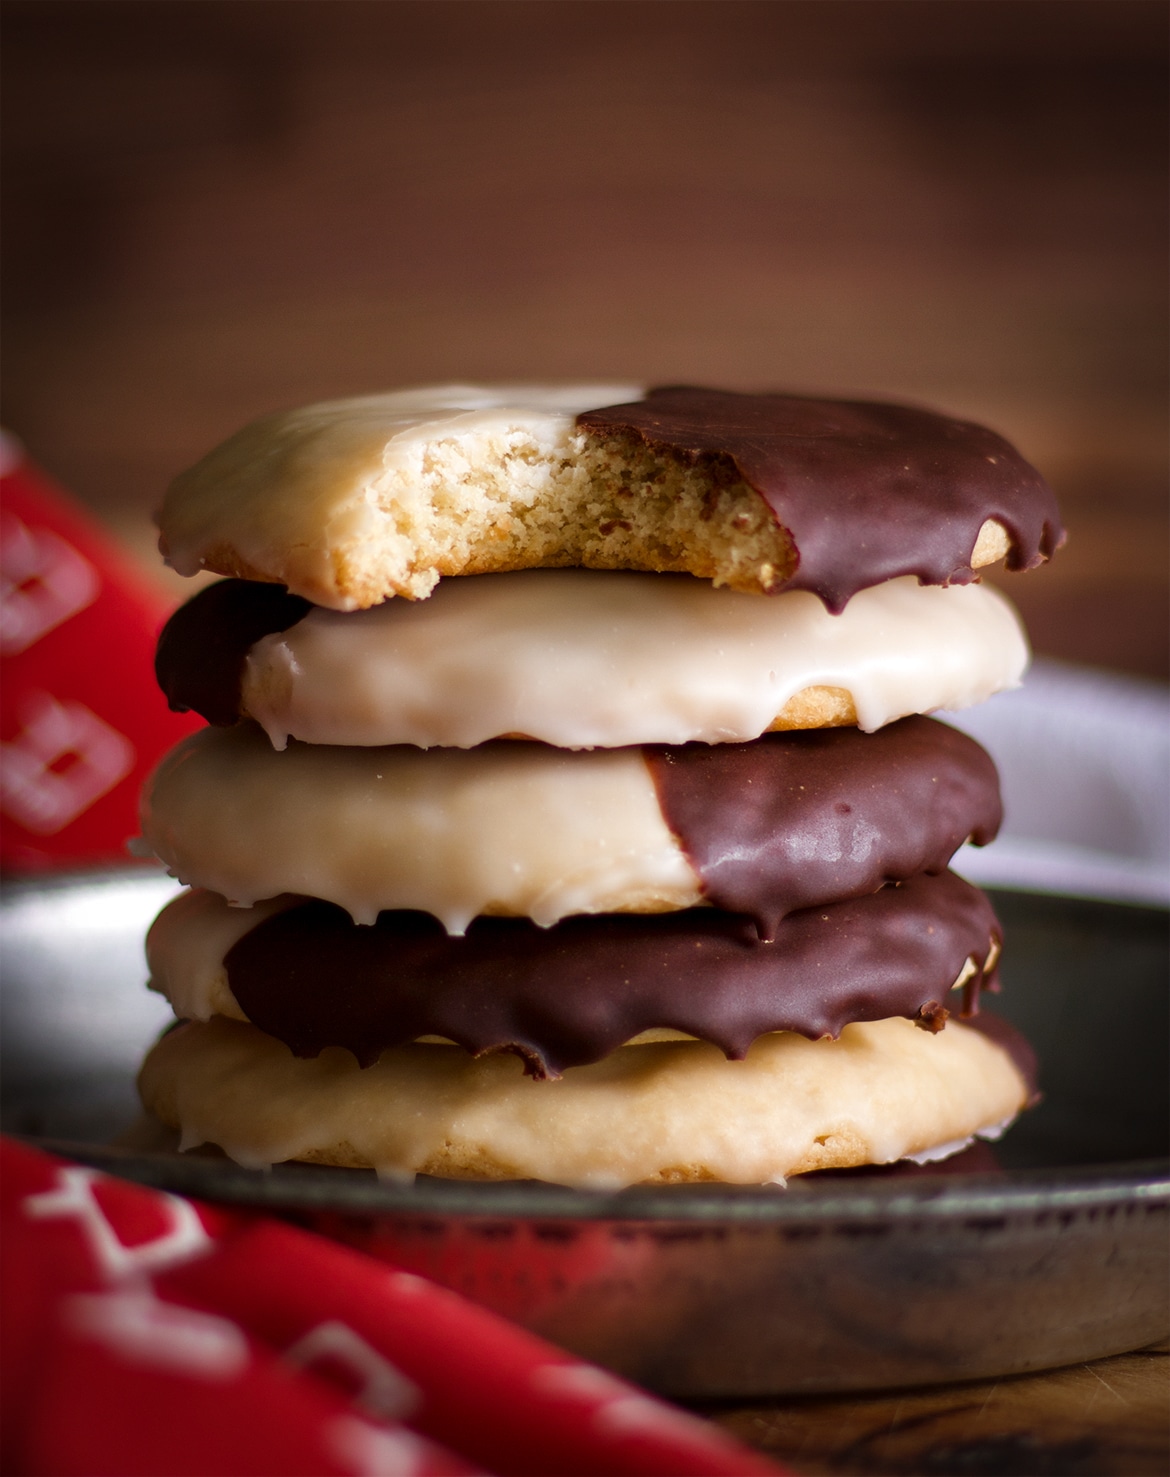 A stack of New York Black and White Cookies, the top cookie has a bite taken out of it.